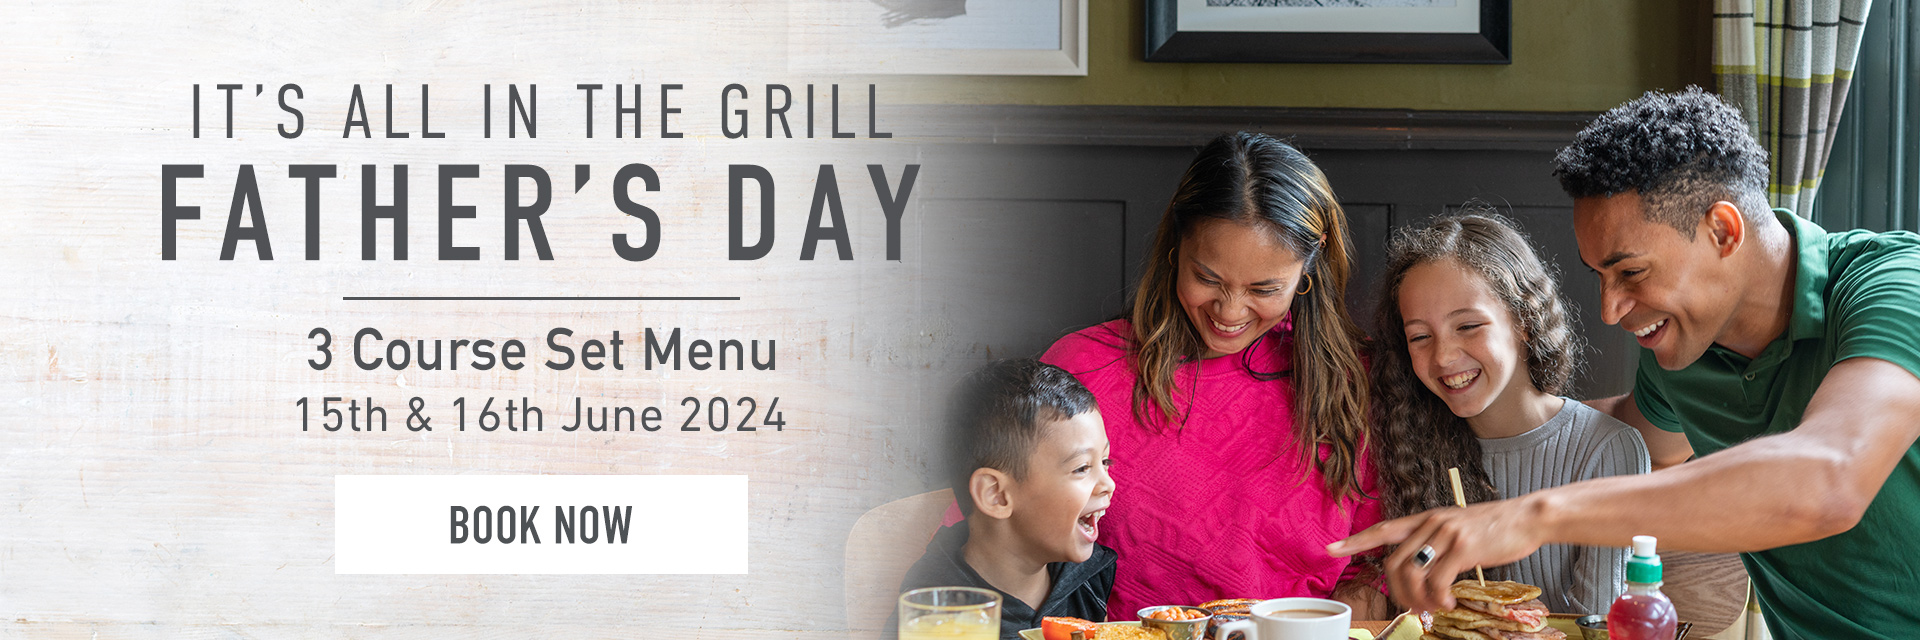 Father’s Day at HORSE & GROOM SIDCUP